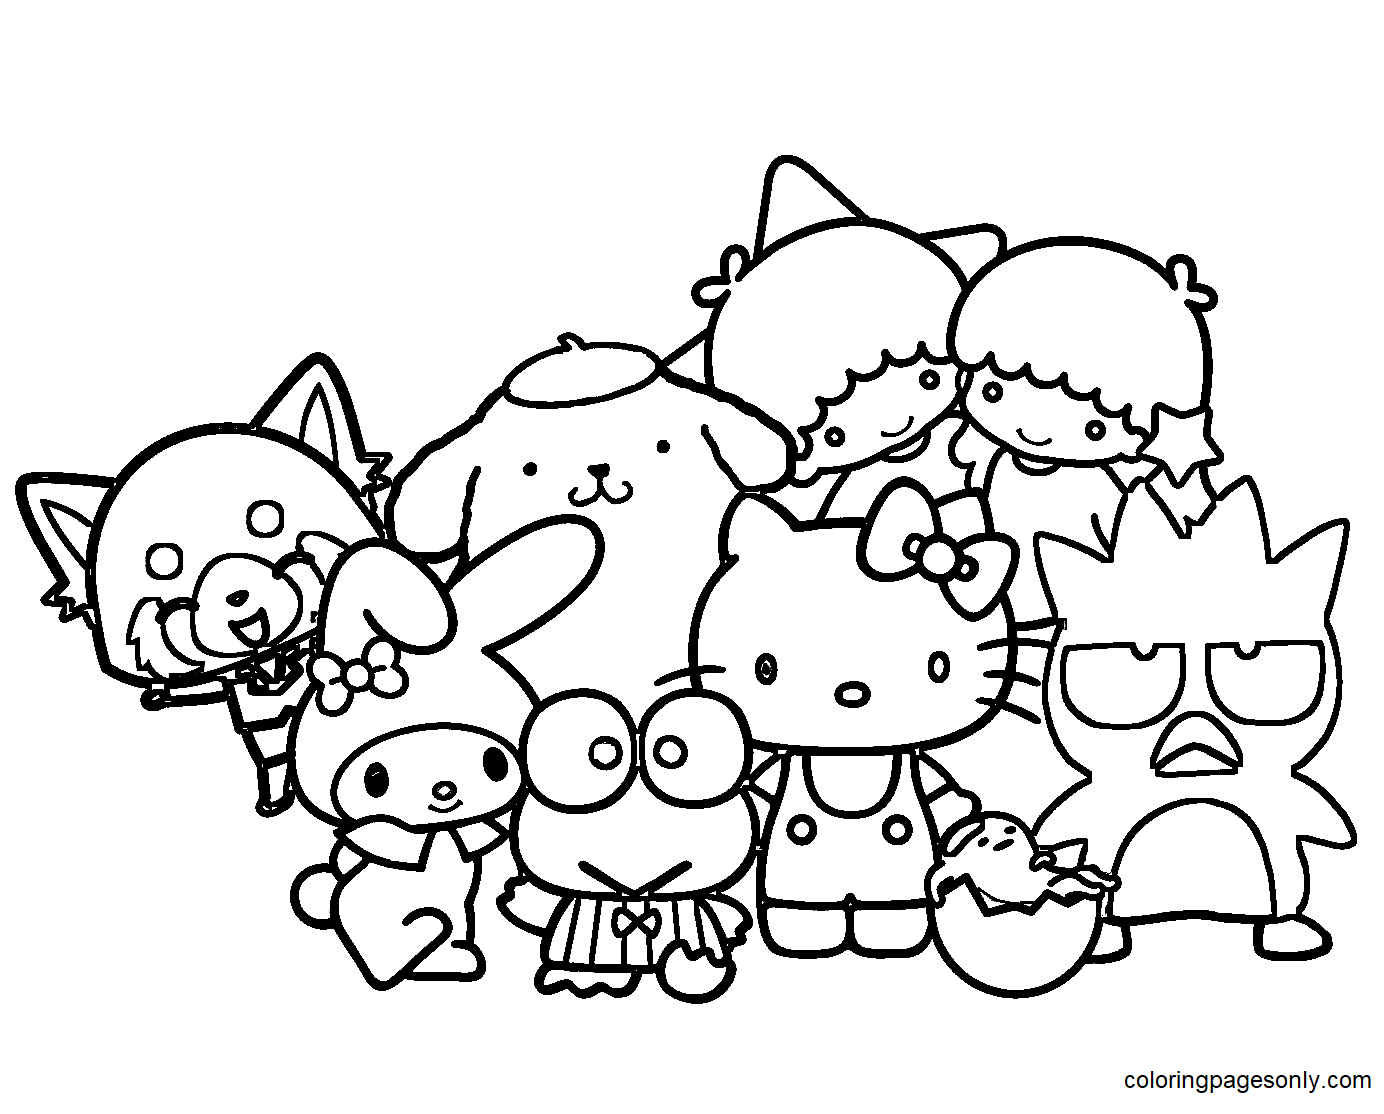 sanrio-characters-coloring-pages-sanrio-characters-coloring-pages-coloring-pages-for-kids